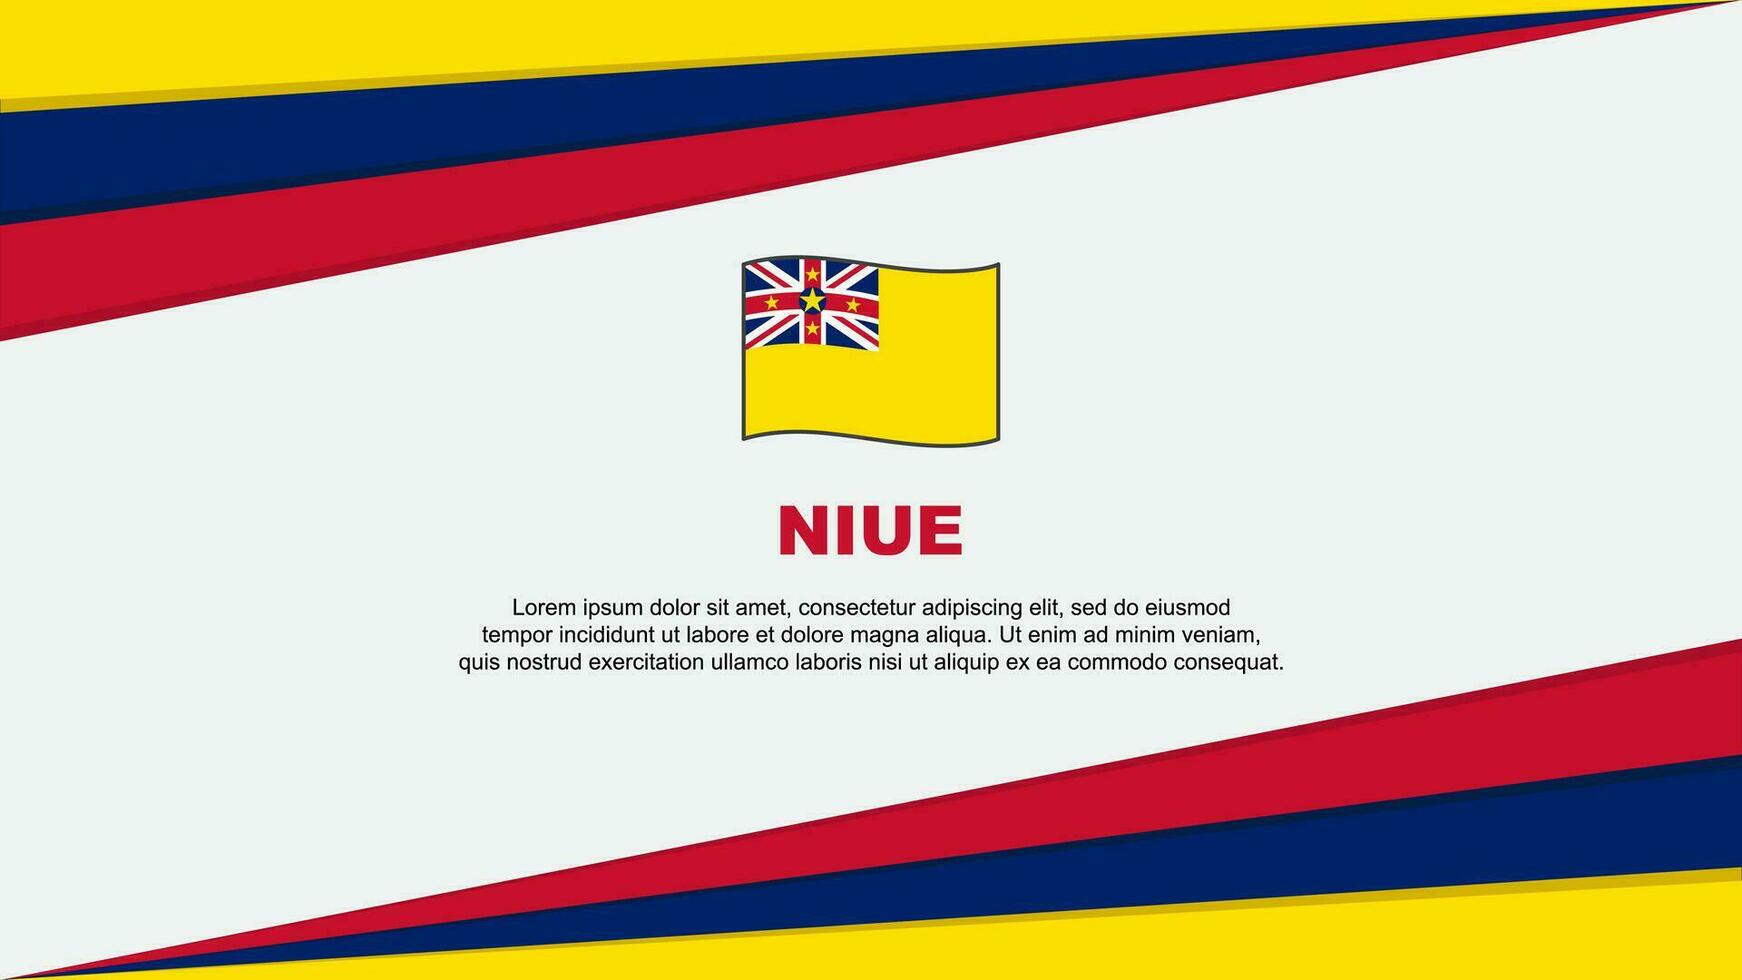 Niue Flag Abstract Background Design Template. Niue Independence Day Banner Cartoon Vector Illustration. Niue Design